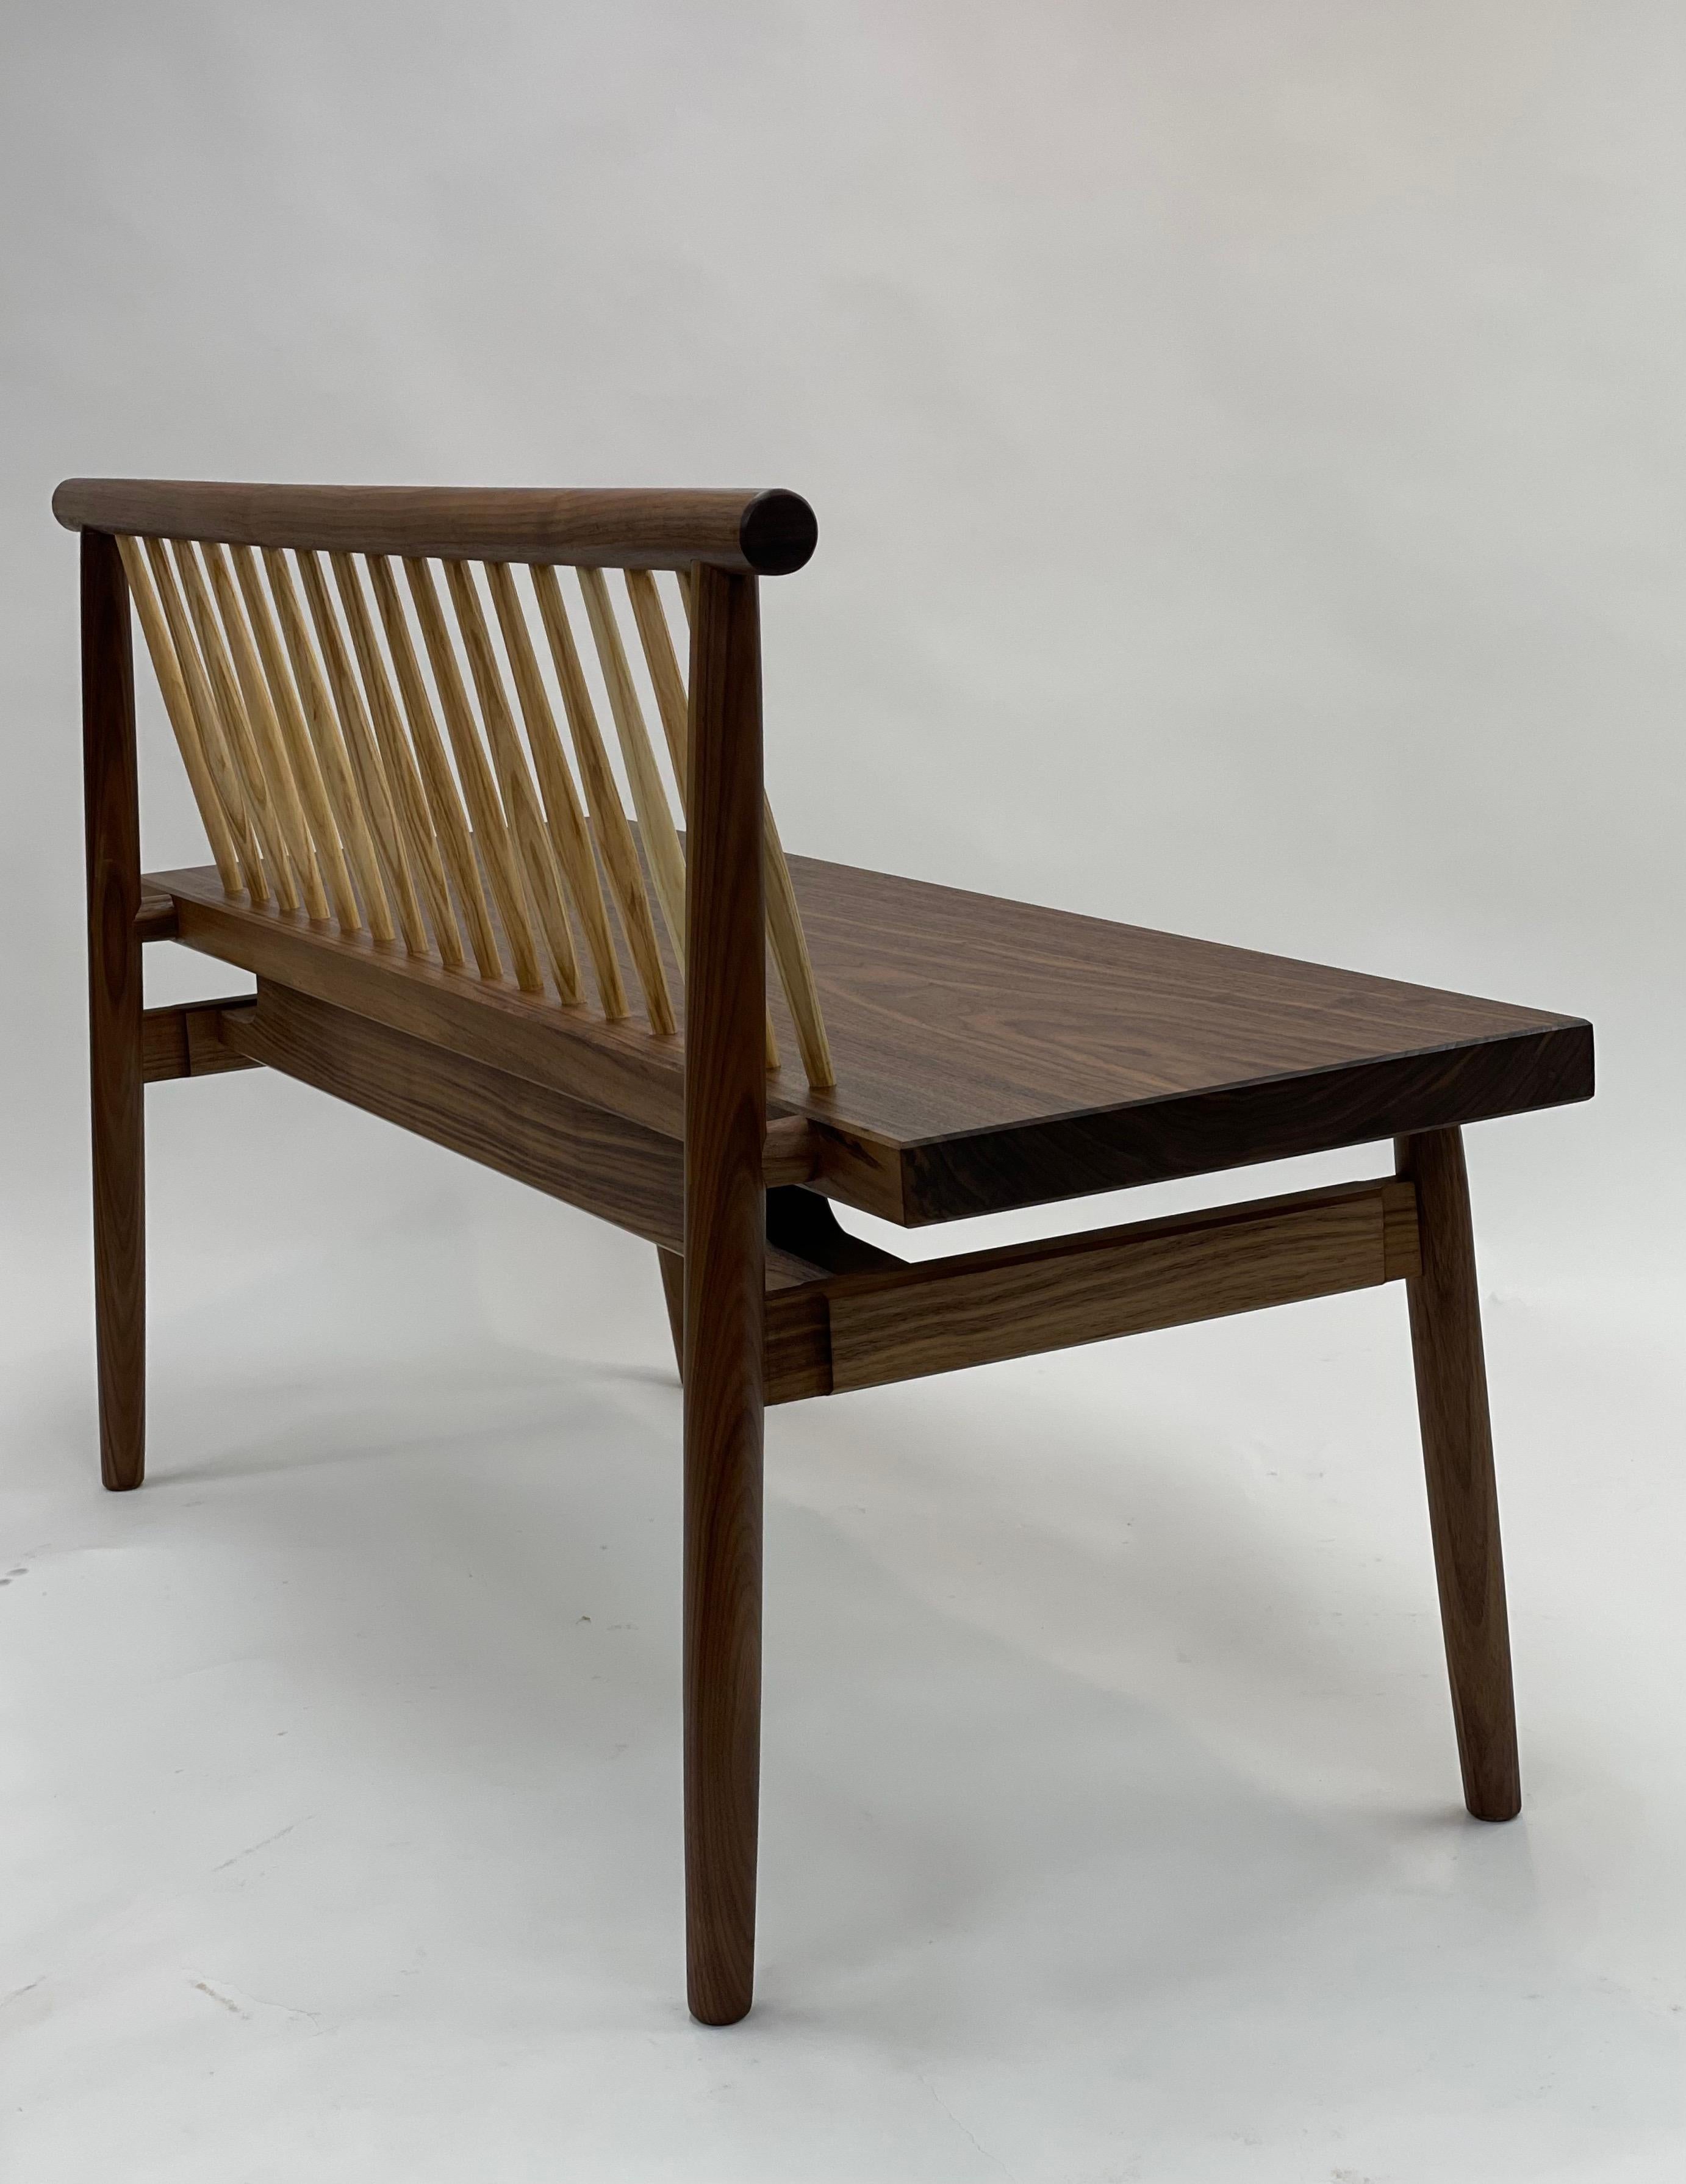 Contemporary walnut bench handmade by Brian Holcombe utilizing the techniques of traditional Windsor chair making combined with traditional mortise and tenon joinery similar to that utilized for timber framed structures. 

The bench is shown in